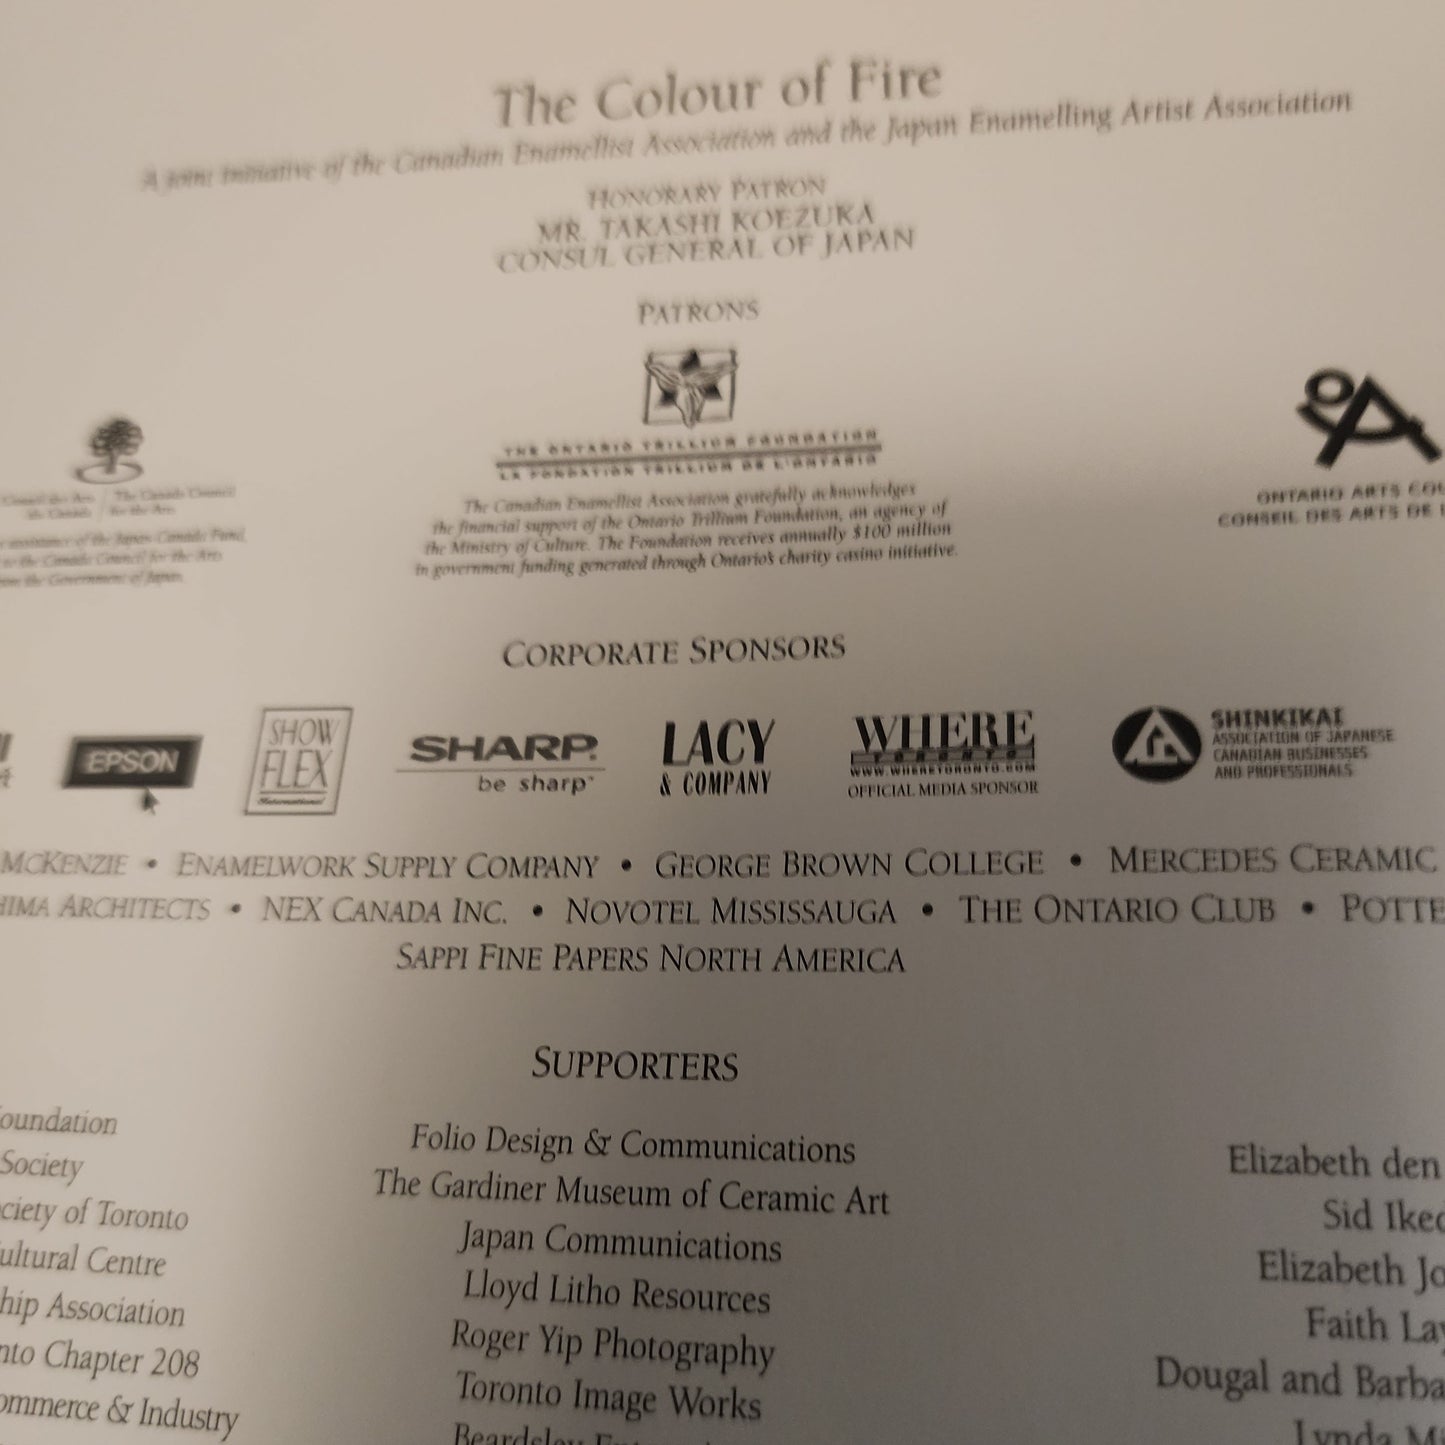 The Emporium Book Shelf  - The Colour of Fire: Contemporary Enamel Arts from Japan and Canada by David Hustler